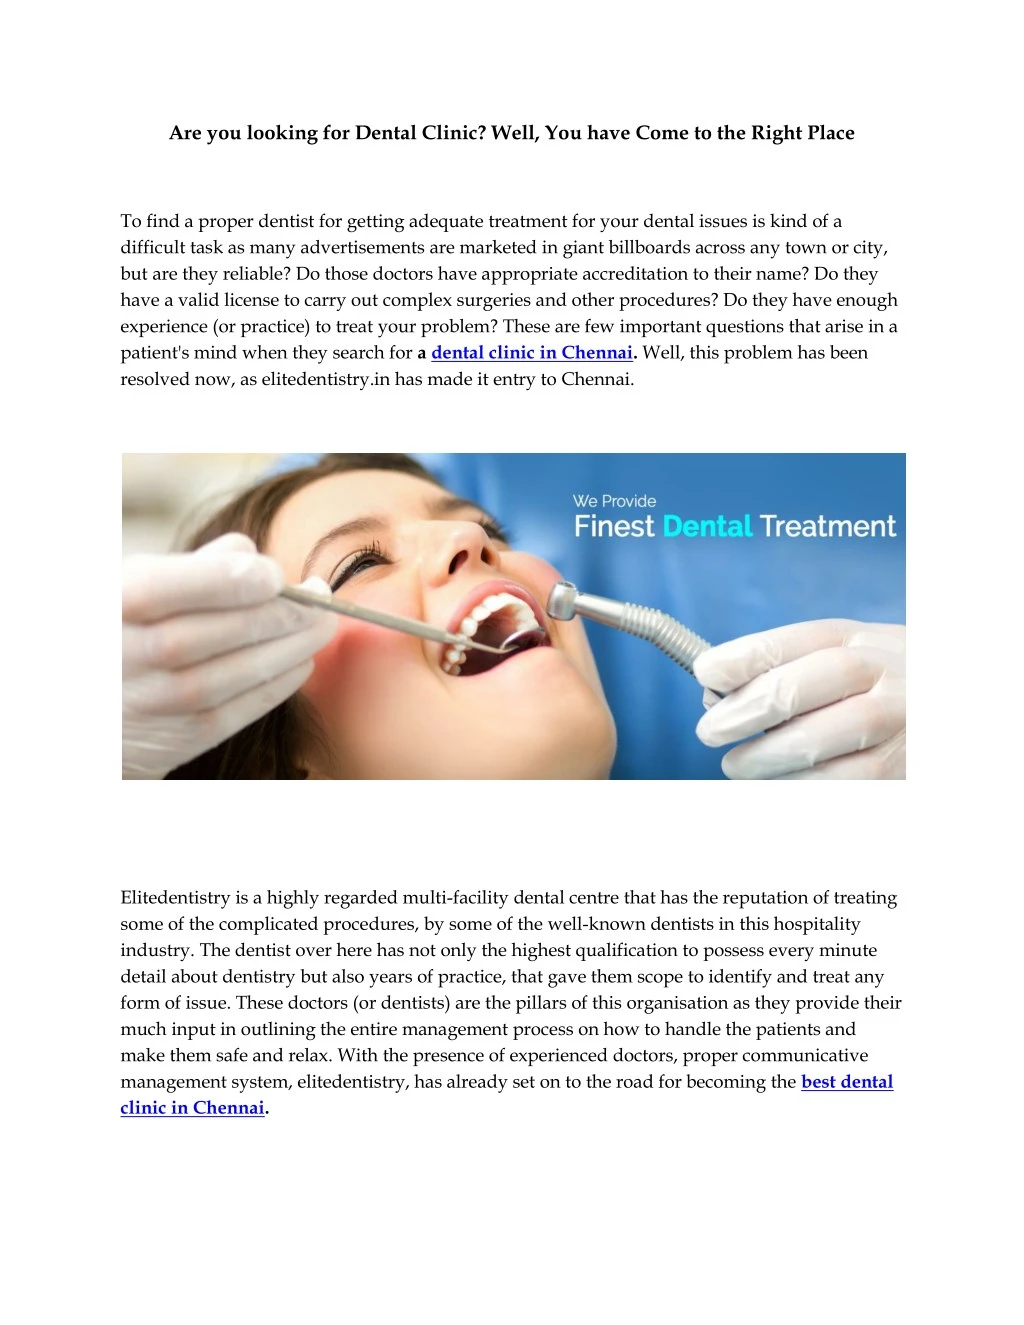 are you looking for dental clinic well you have